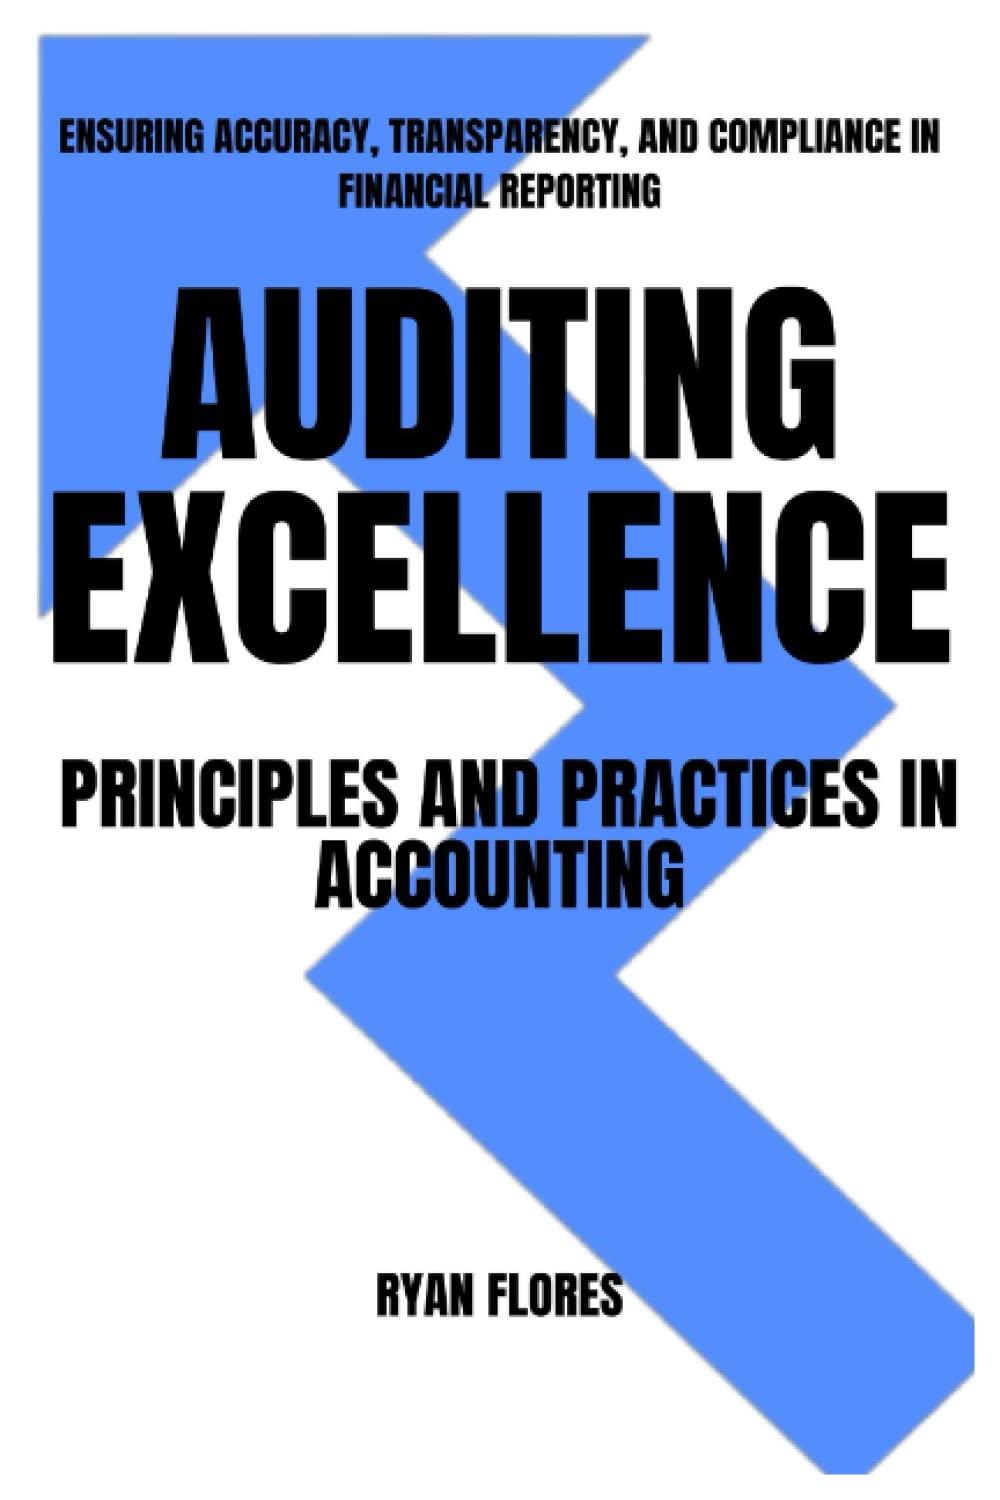 auditing excellence principles and practices in accounting ensuring accuracy transparency and compliance in